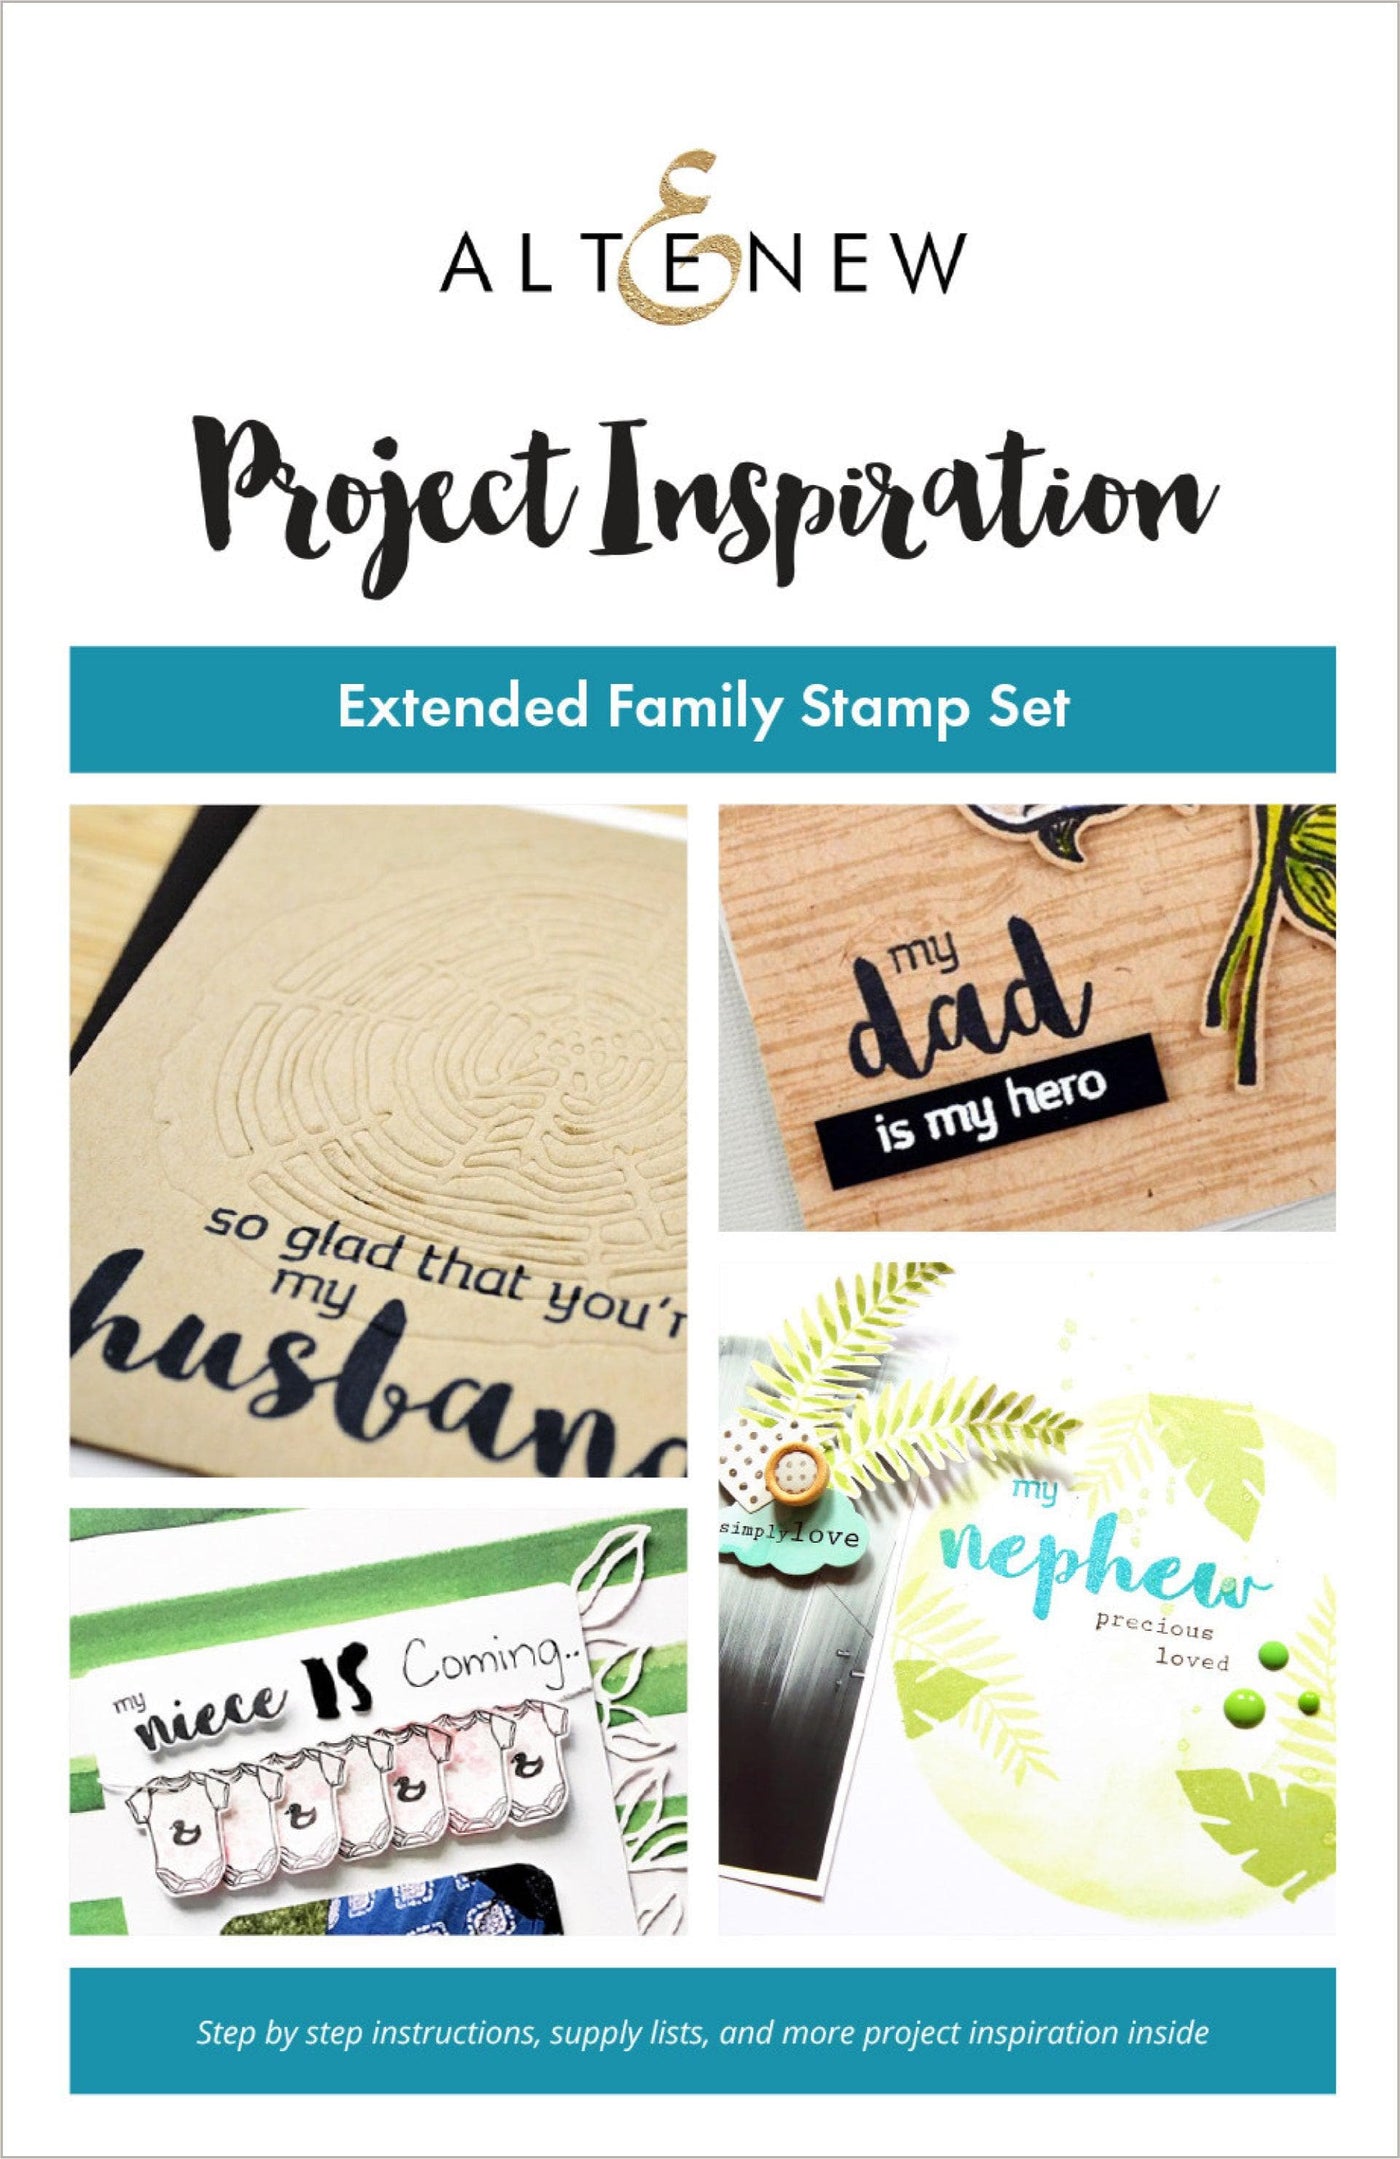 55Printing.com Printed Media Extended Family Inspiration Guide